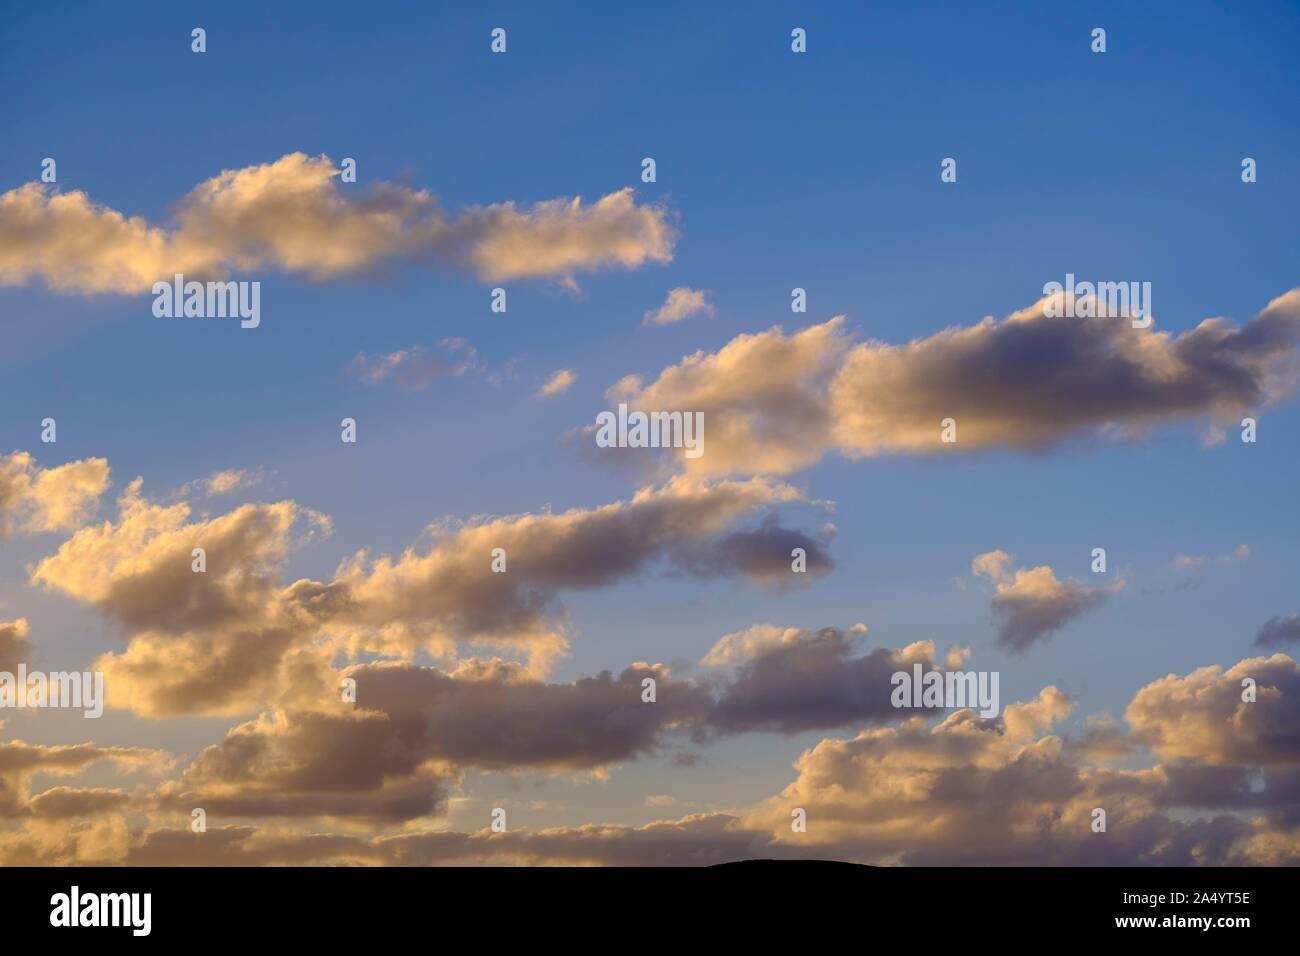 Cloudy sky in the evening light, Lanzarote, Canary Islands, Spain Stock Photo